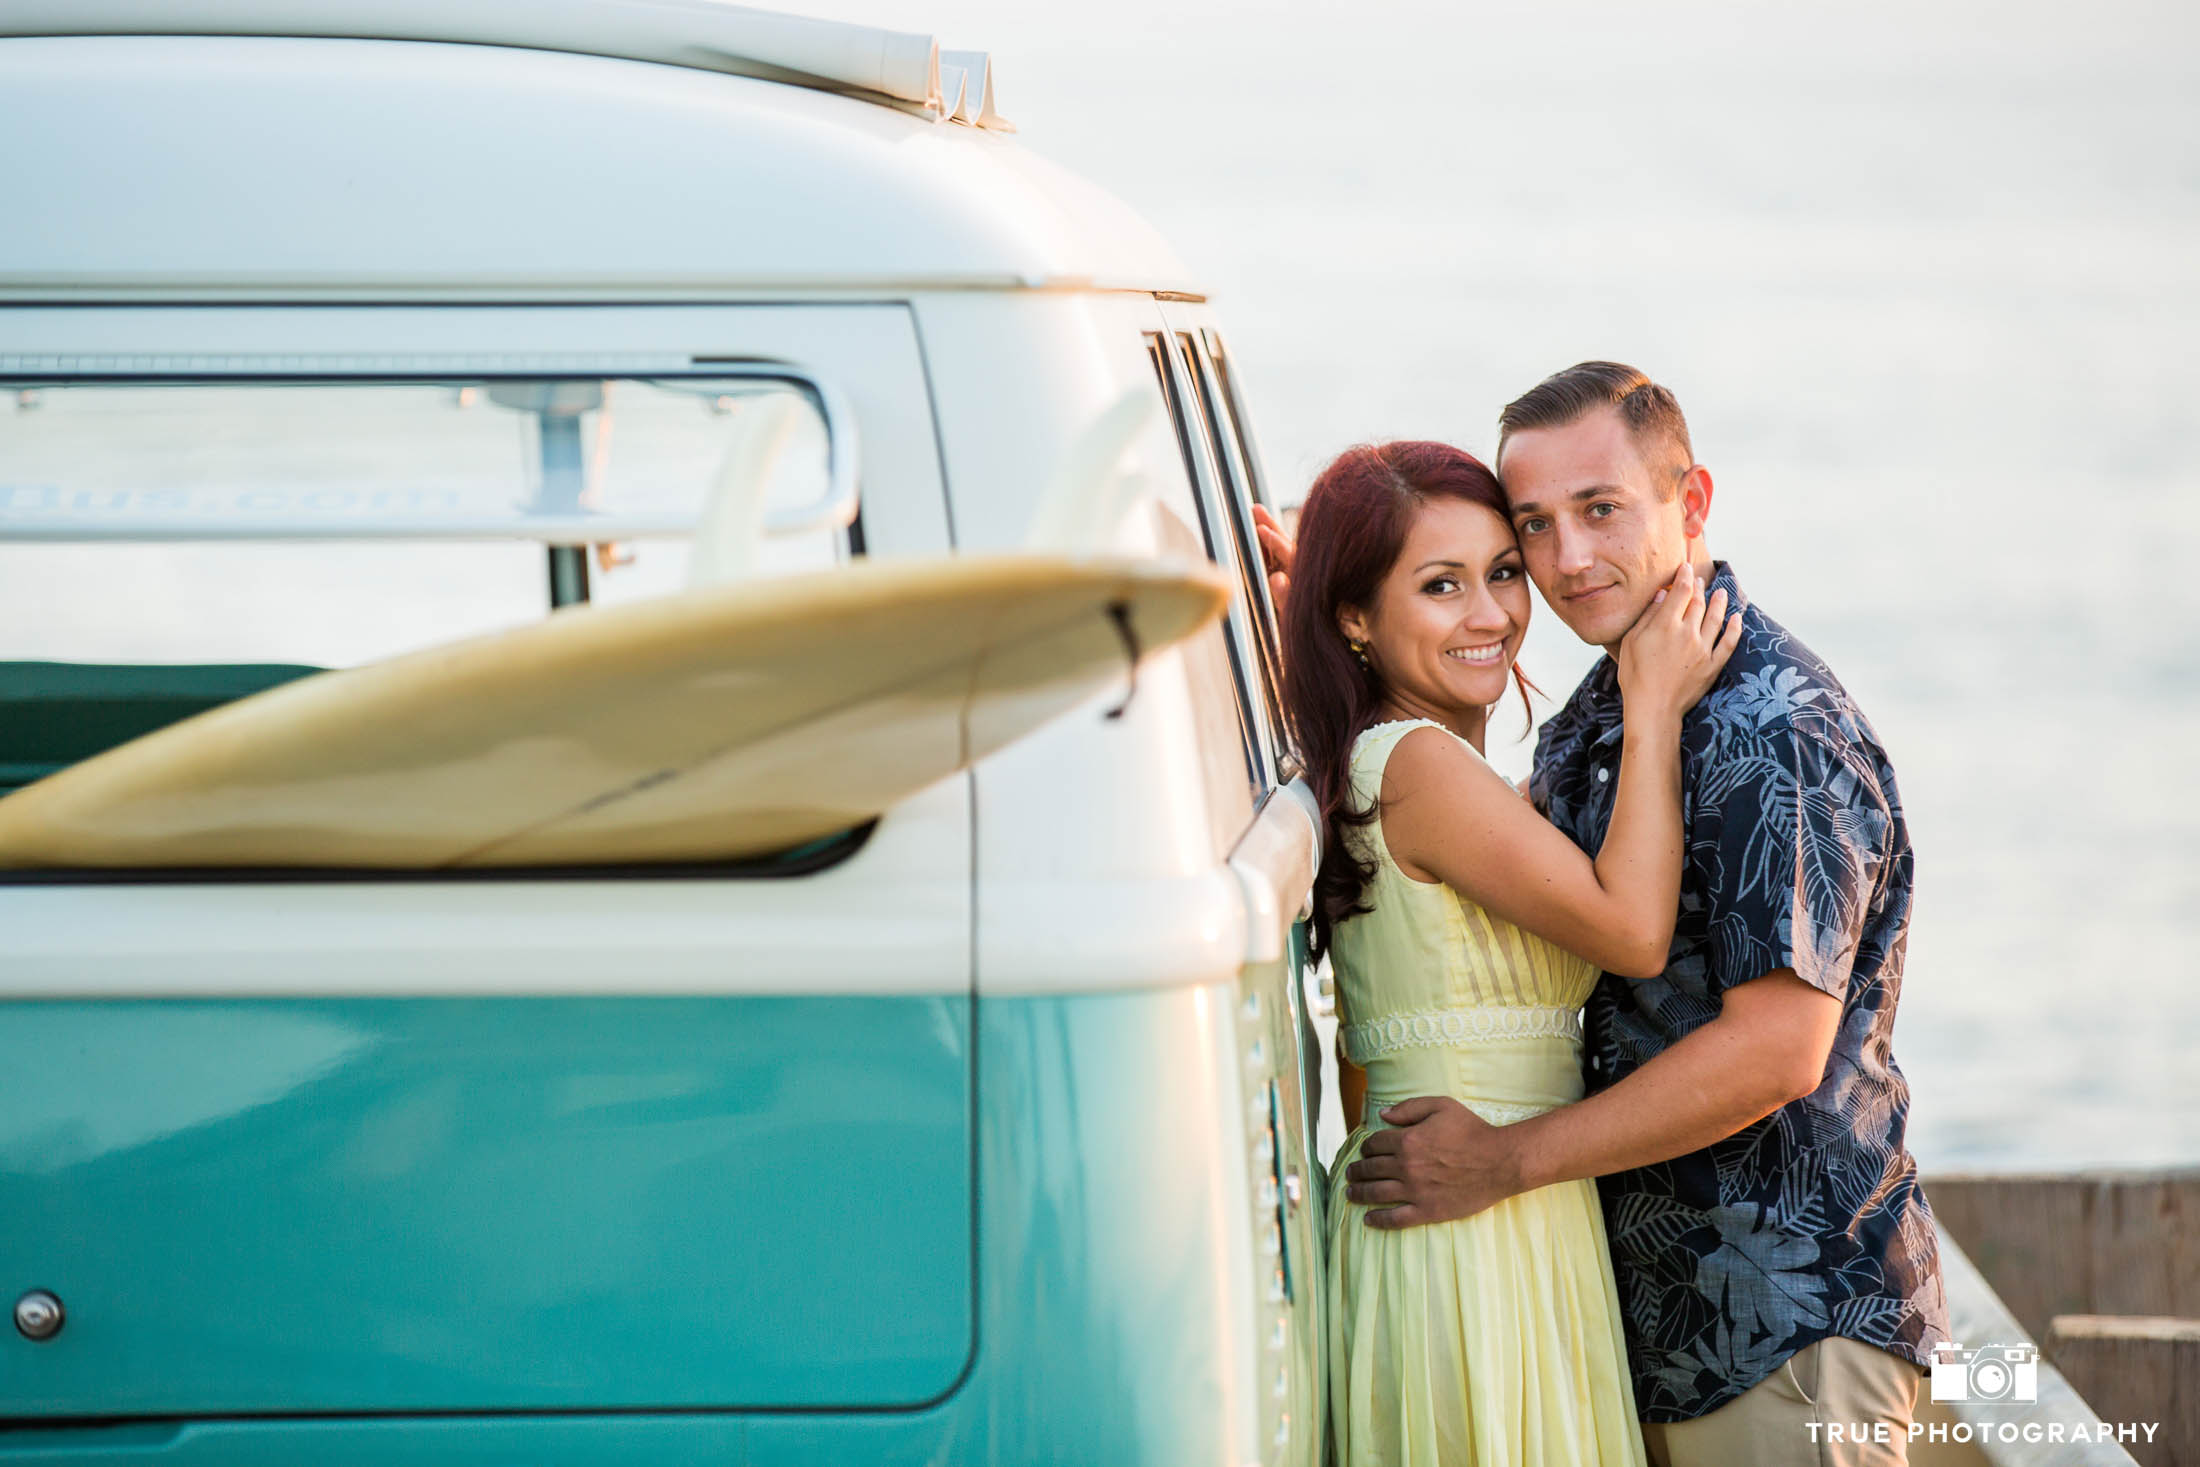 Engaged couple embrace and lean against vintage Volkswagen bus during engagement session